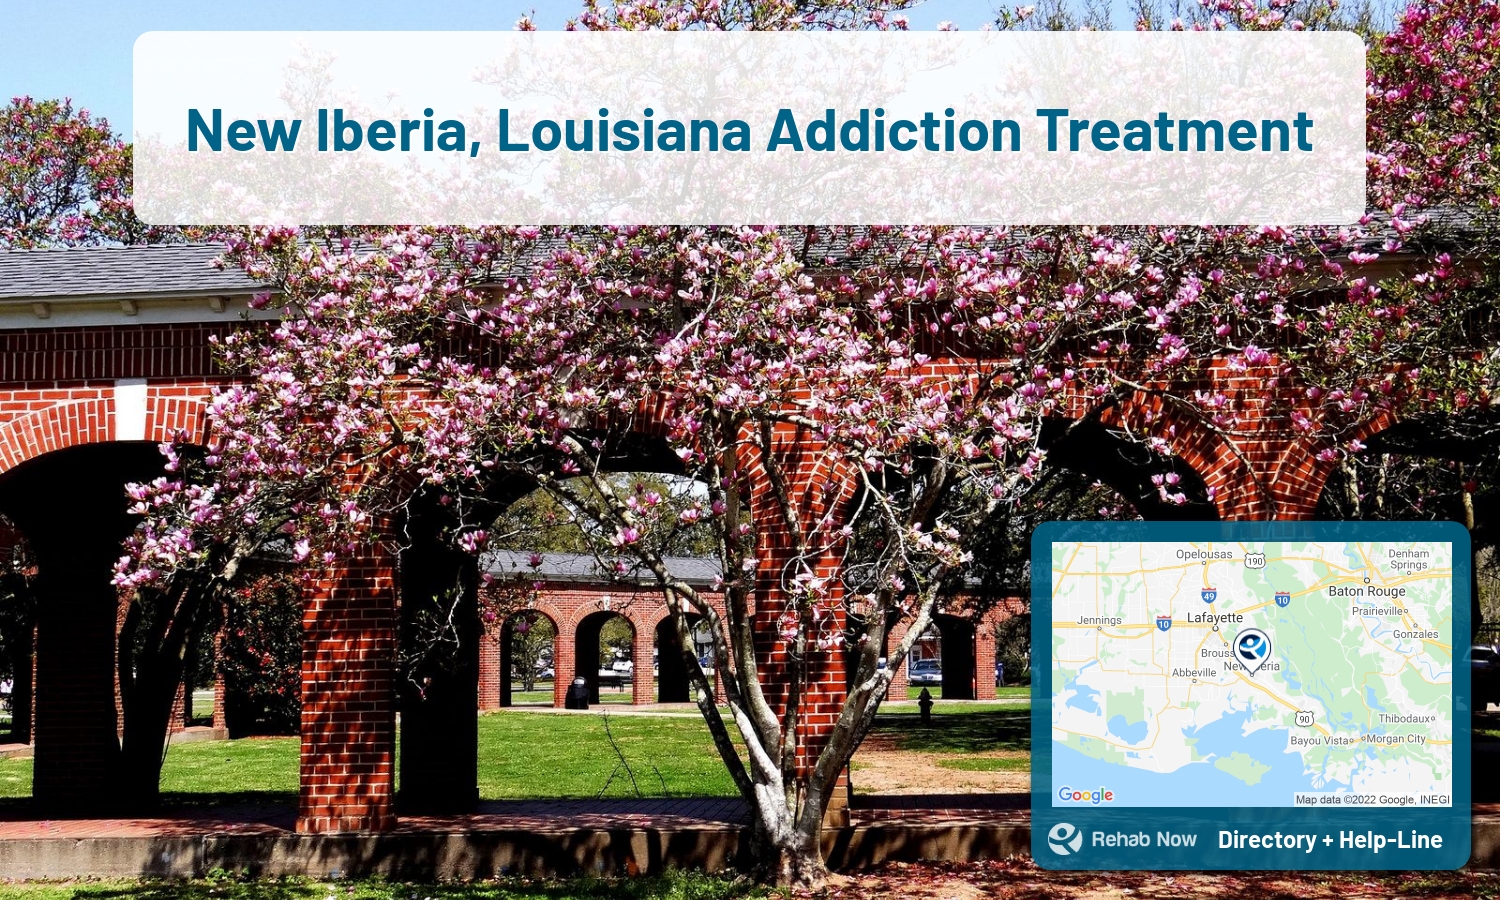 Our experts can help you find treatment now in New Iberia, Louisiana. We list drug rehab and alcohol centers in Louisiana.